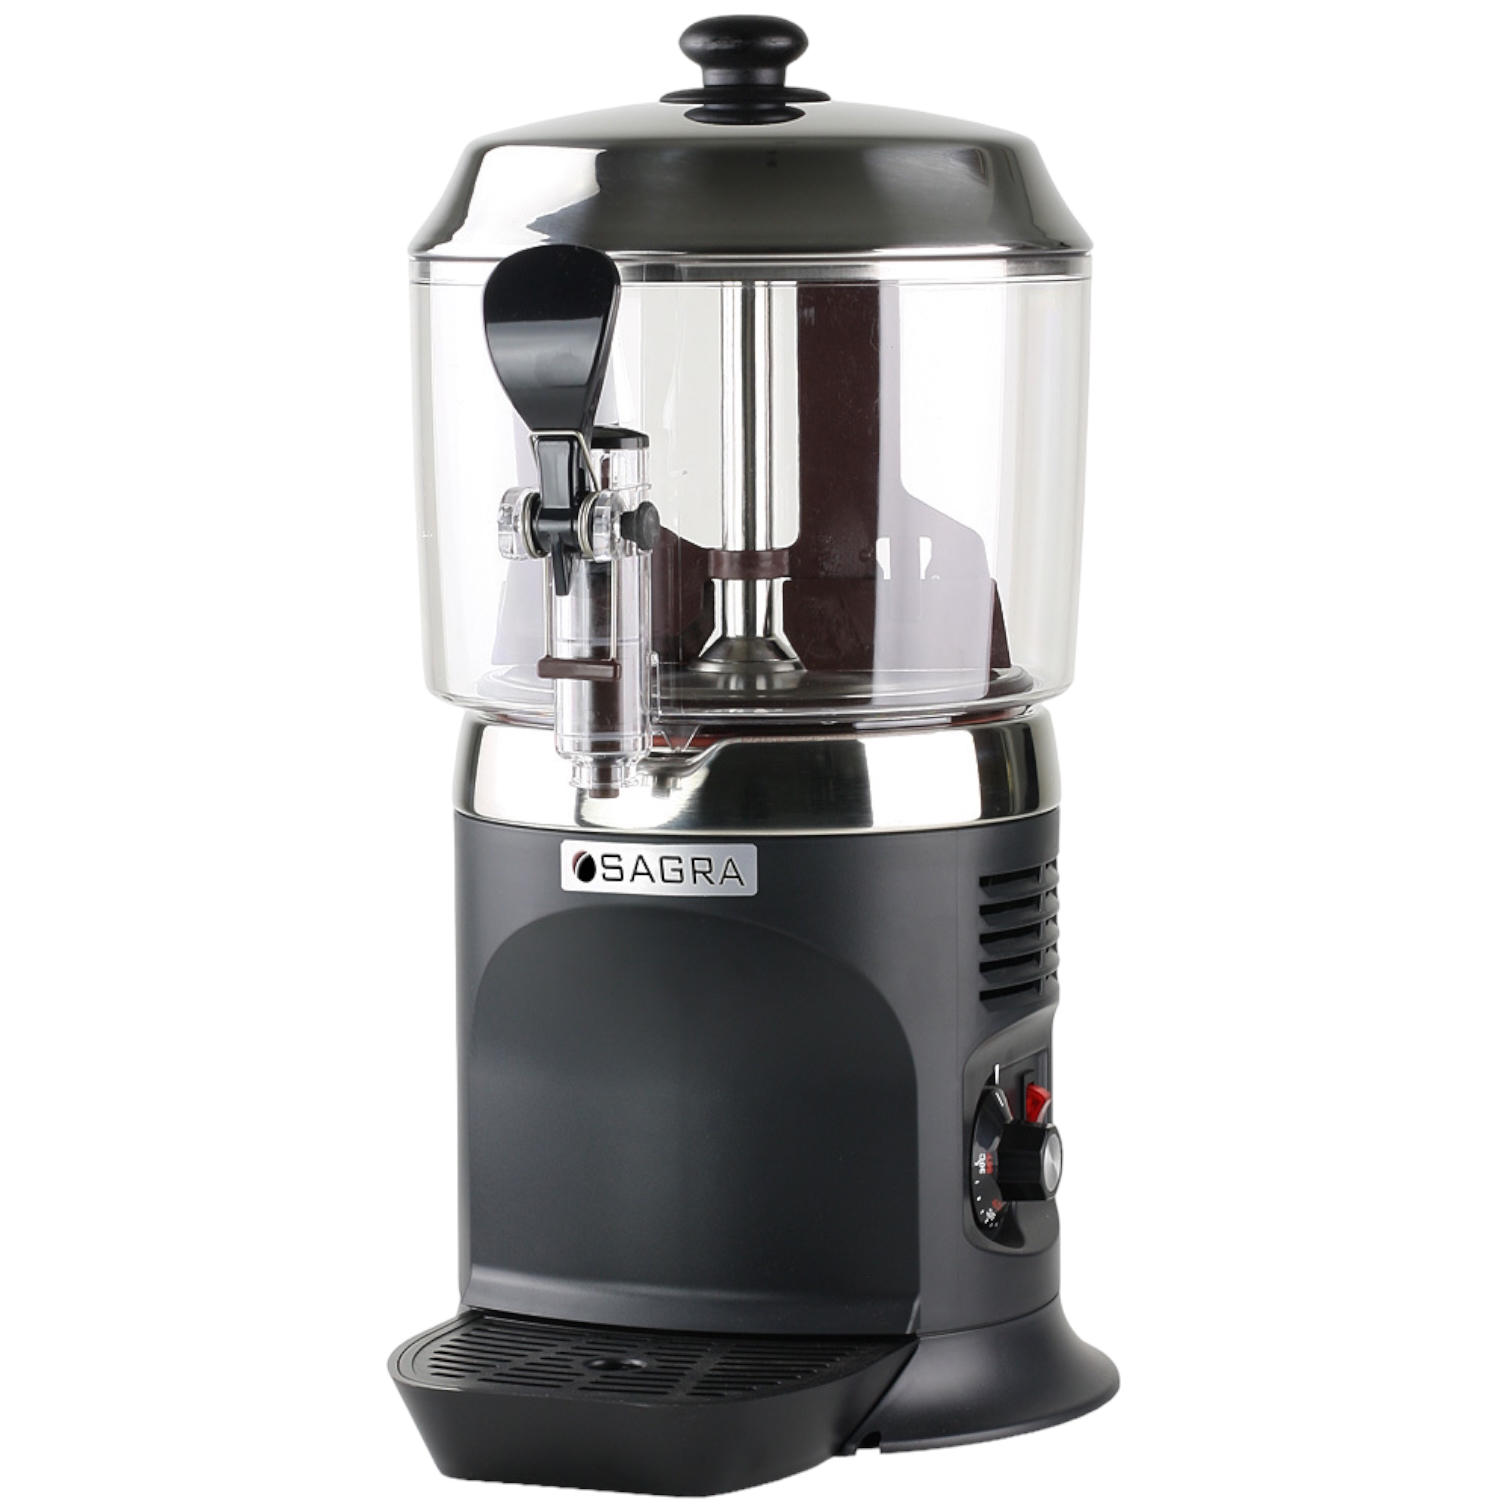 https://www.sweetfountains.com/wp-content/uploads/2020/08/Commercial-Chocolate-Dispenser-Black-w-stainless-top.jpg